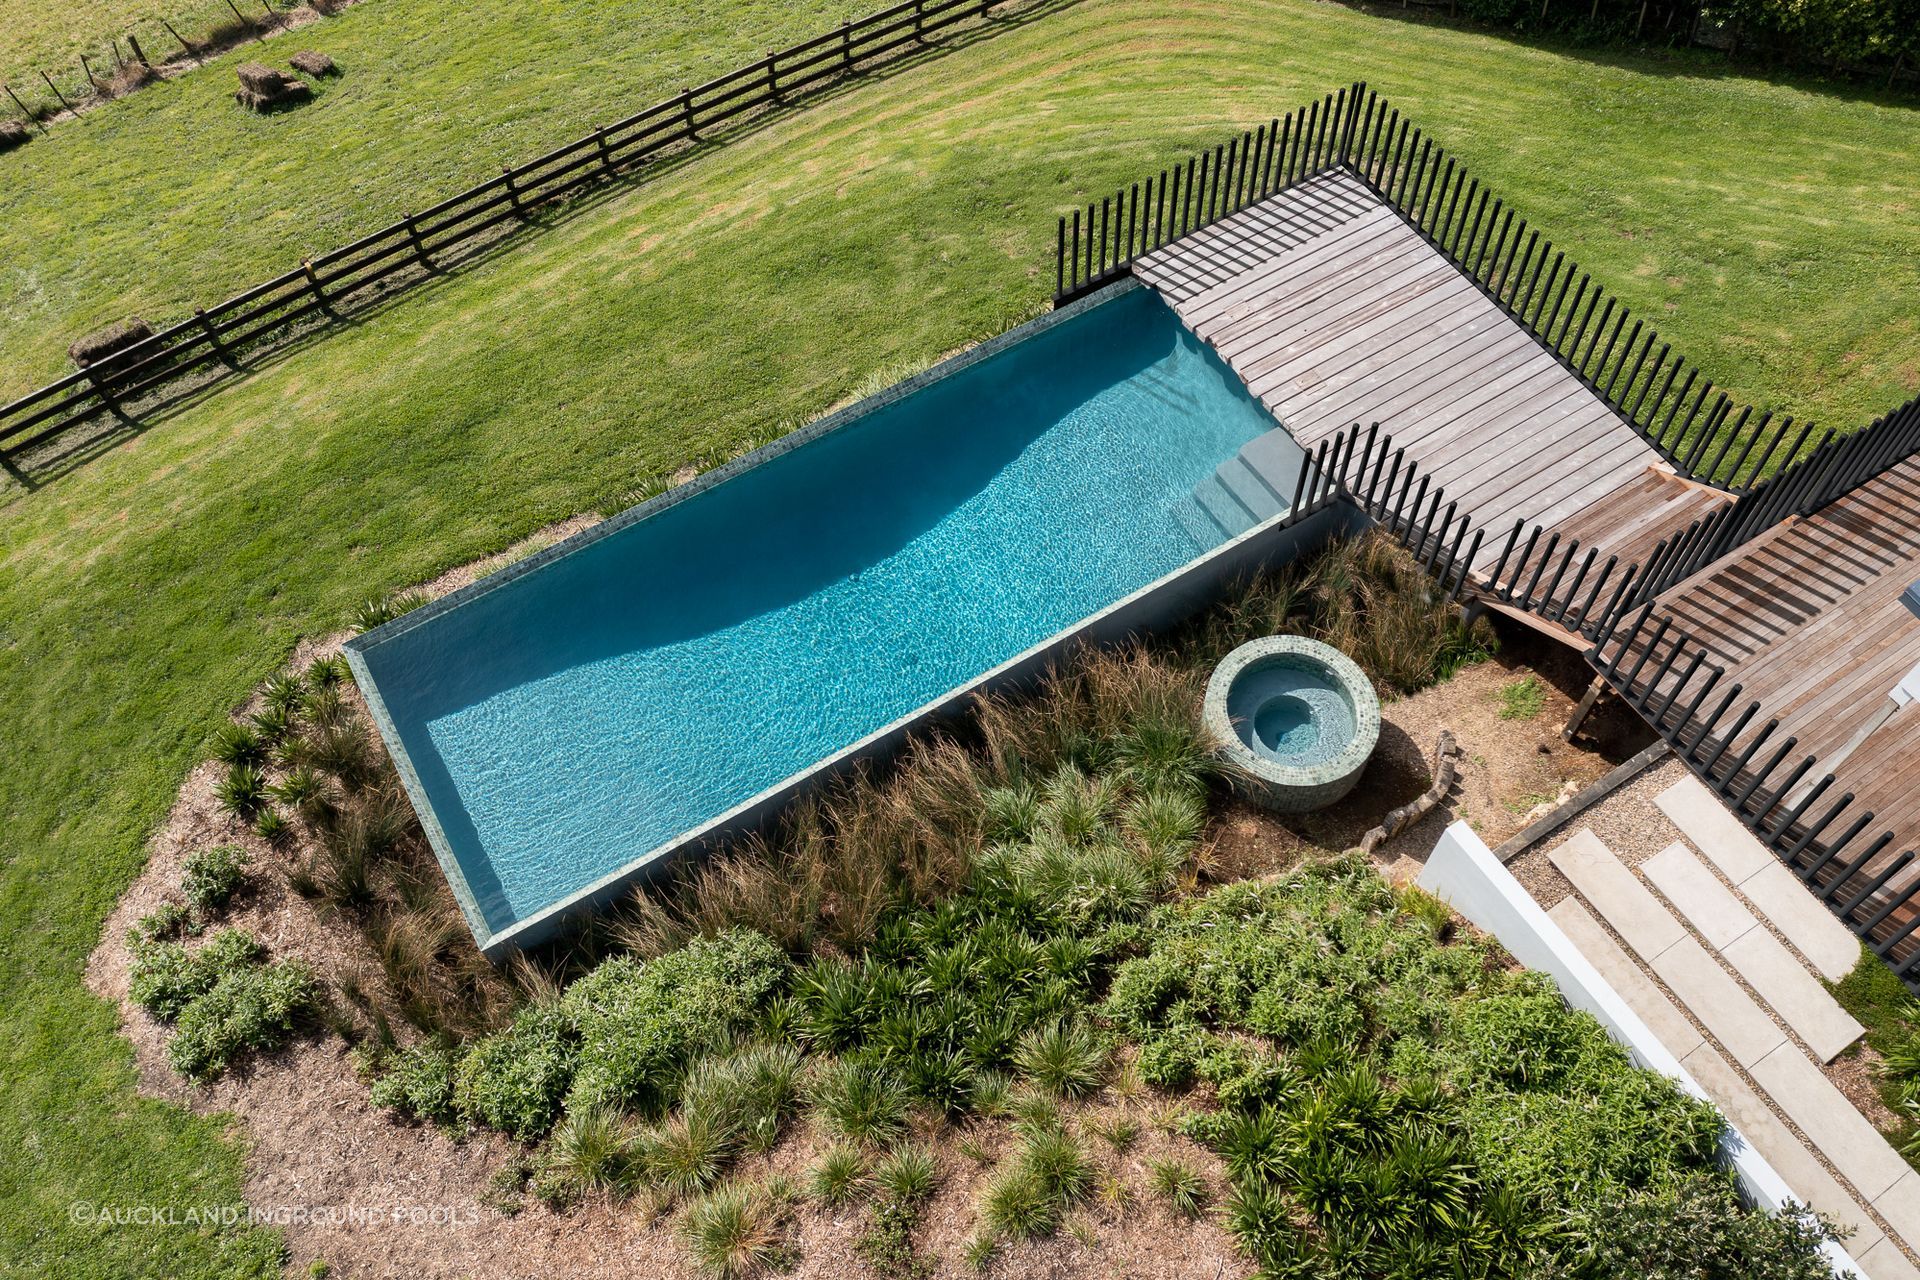 Using the existing lay of the land, this above-ground rectangular pool and circular garden spa are embraced by flourishing native planting.